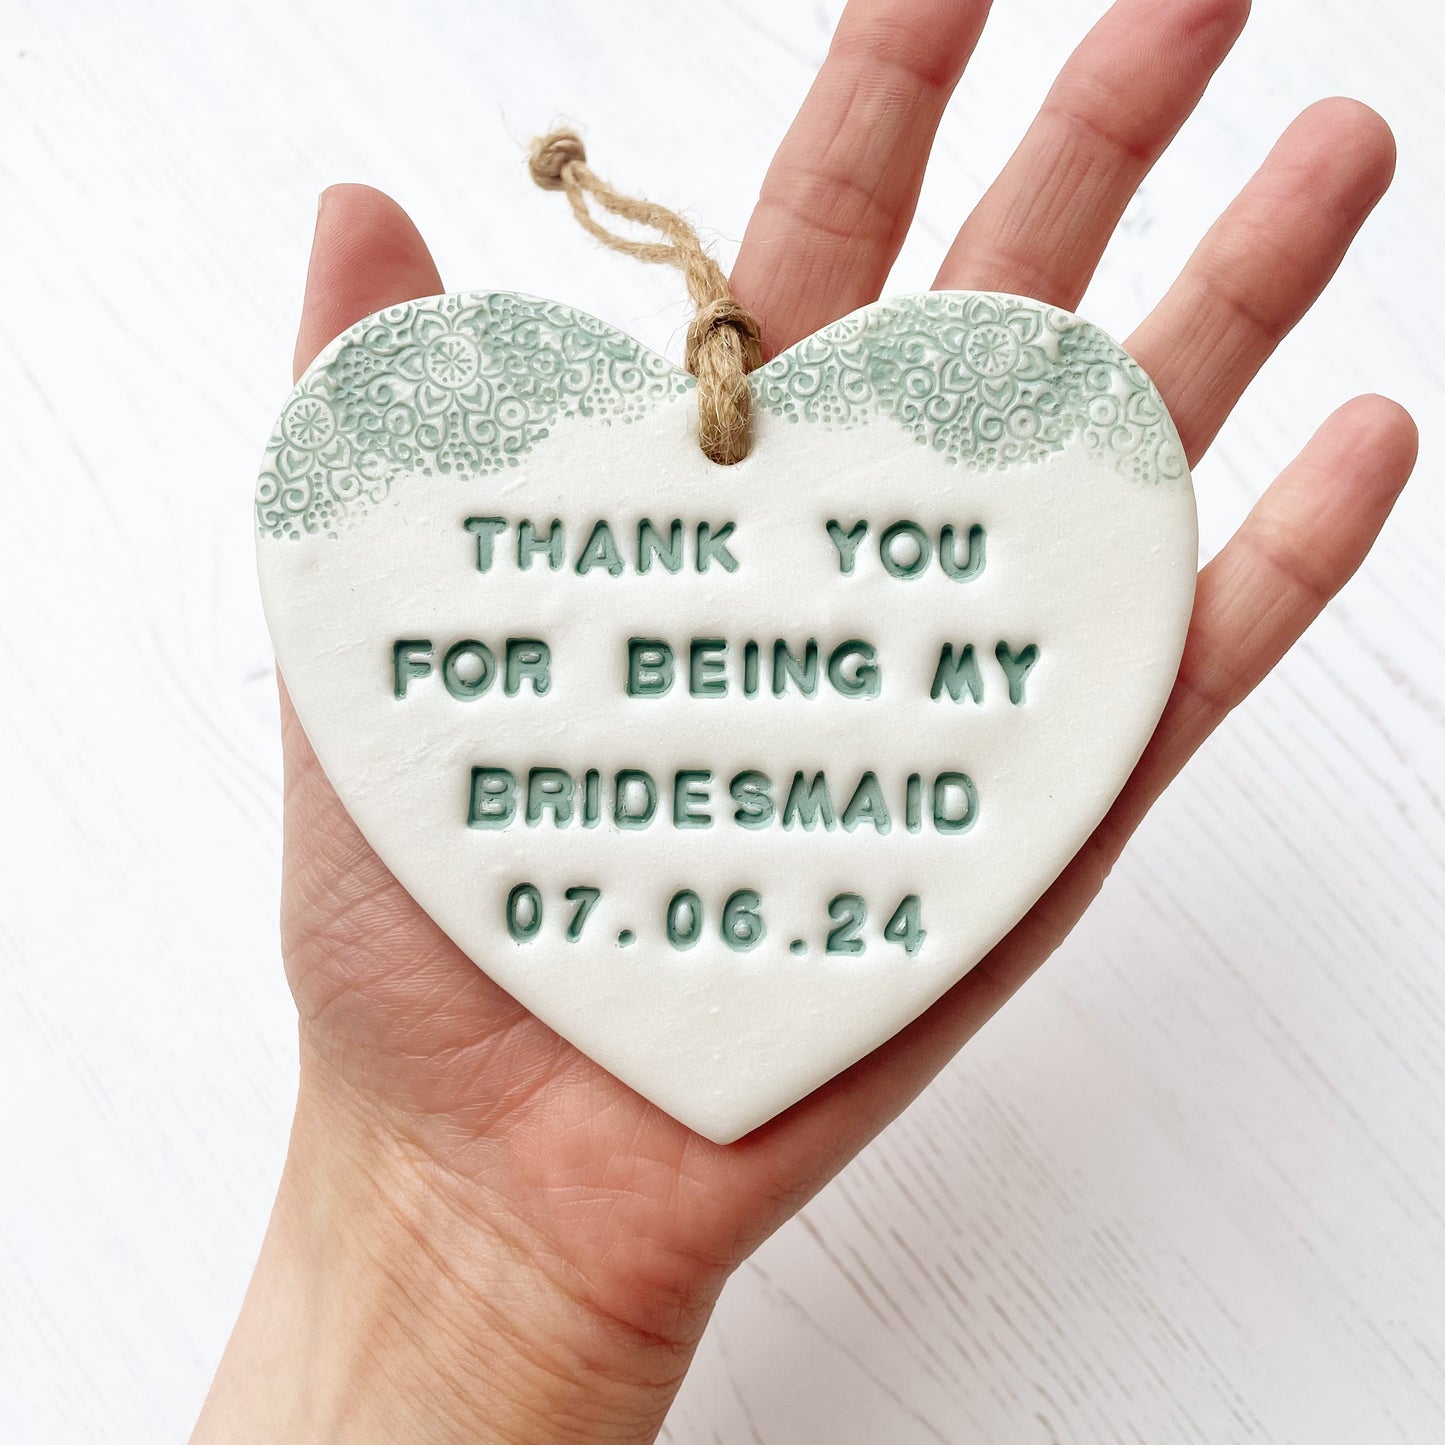 Personalised Bridesmaid thank you gift, pearlised white clay hanging heart with a sage green lace edge at the top of the heart, the heart is personalised with THANK YOU FOR BEING MY BRIDESMAID 07.06.24